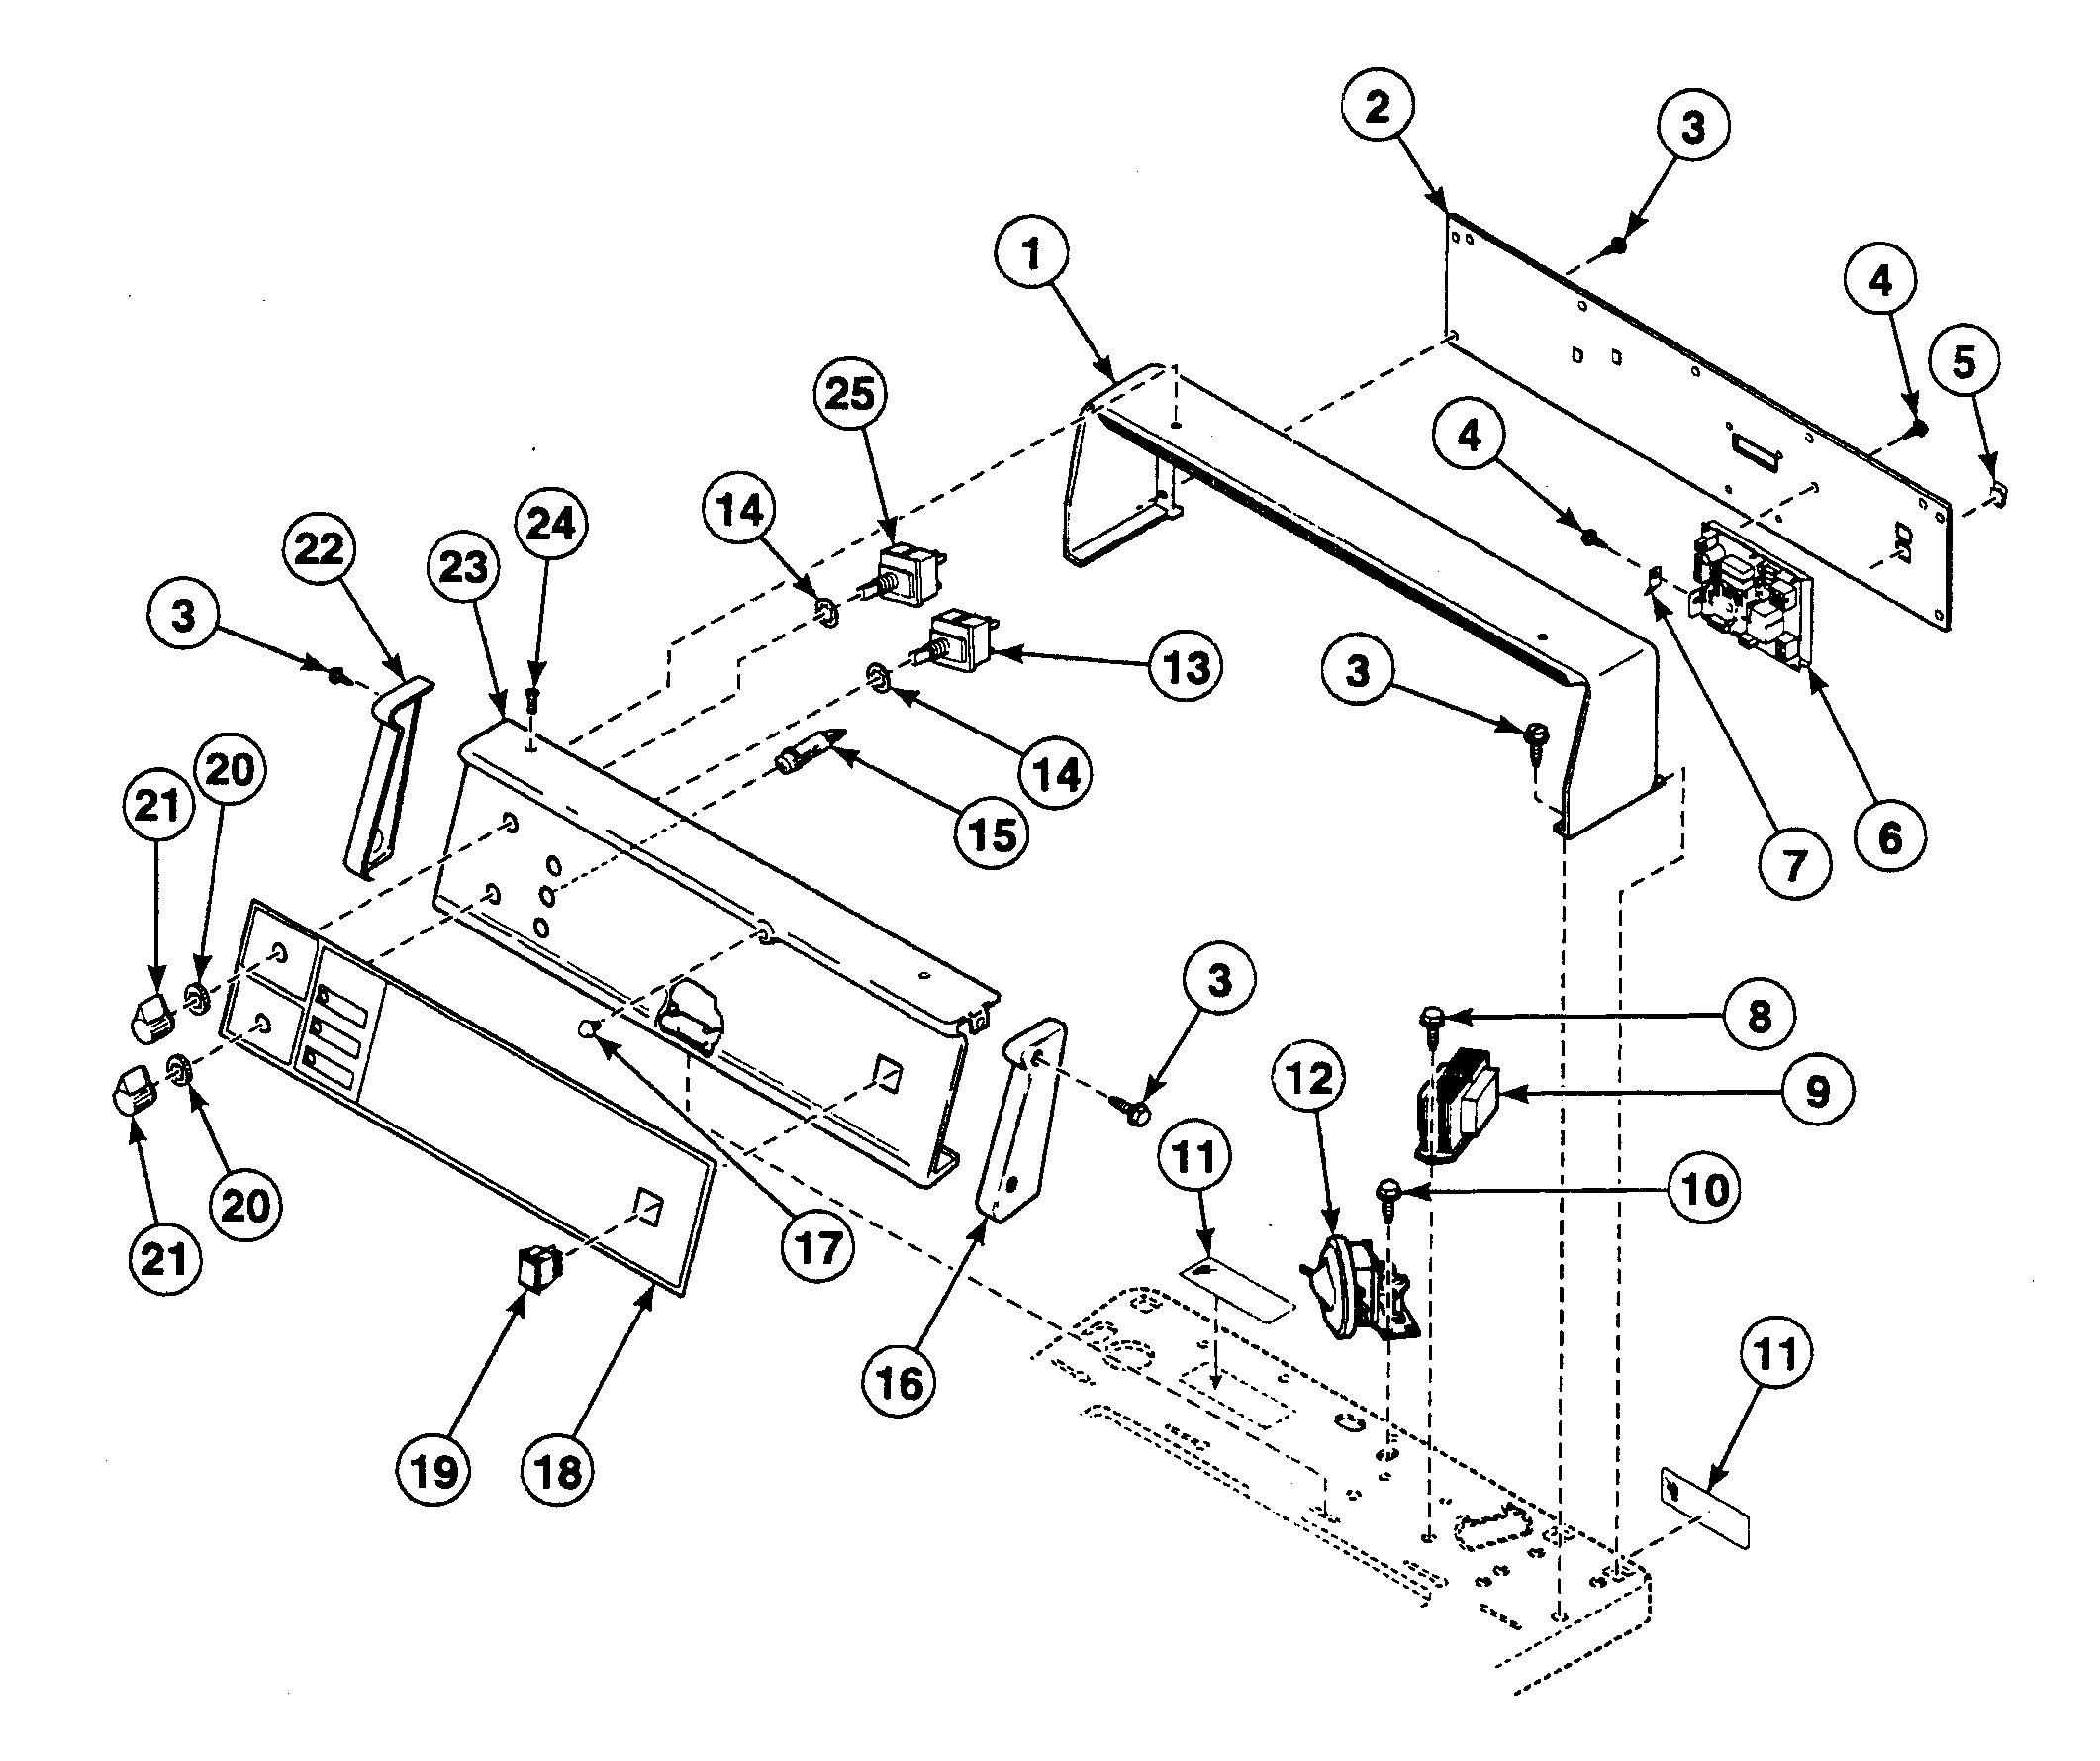 29 Speed Queen Commercial Washer Parts Diagram